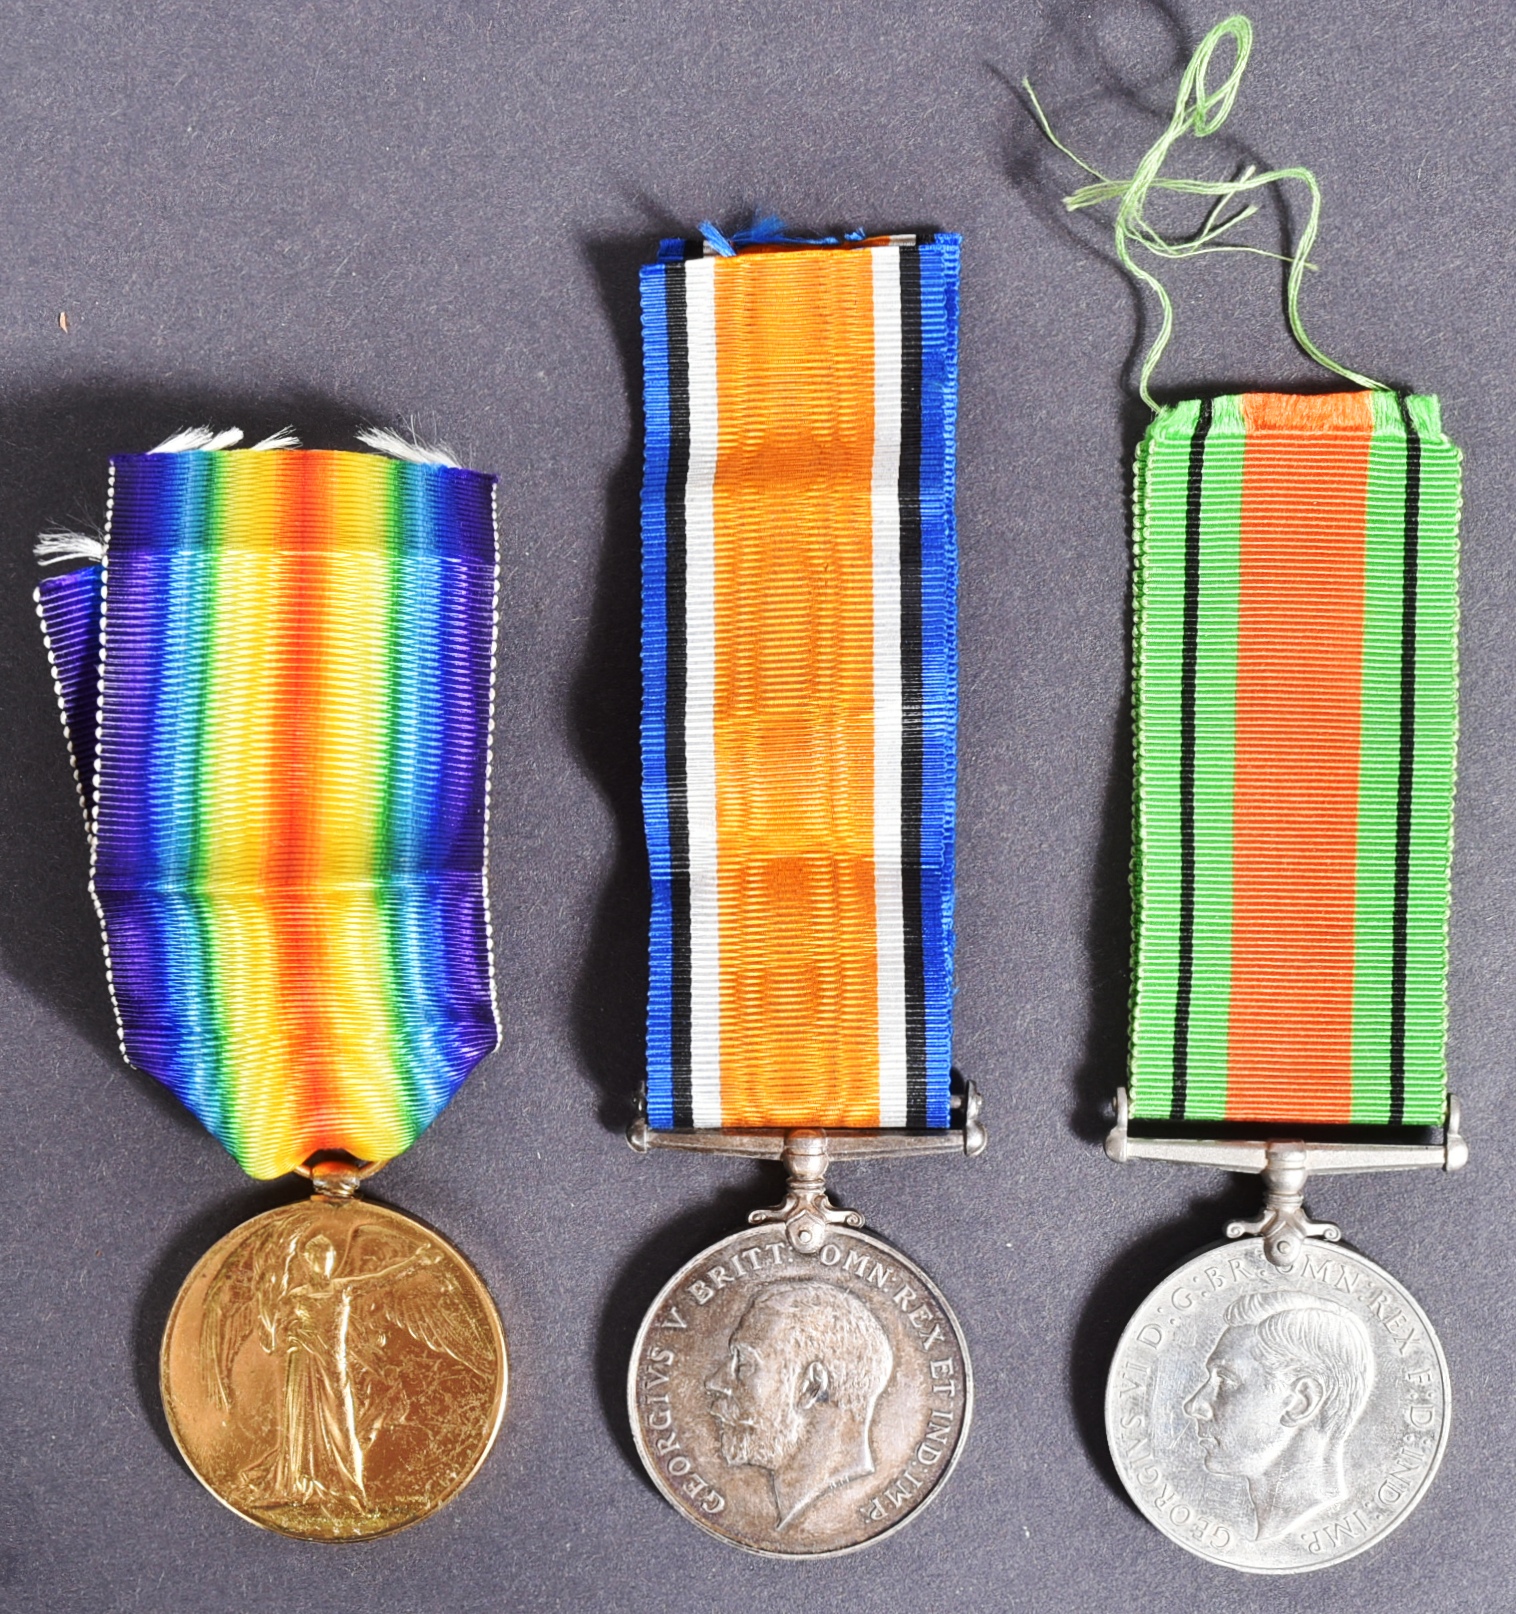 MEDALS - WWI MEDAL PAIR TO PRIVATE IN THE ROYAL ARMY MEDICAL CORPS